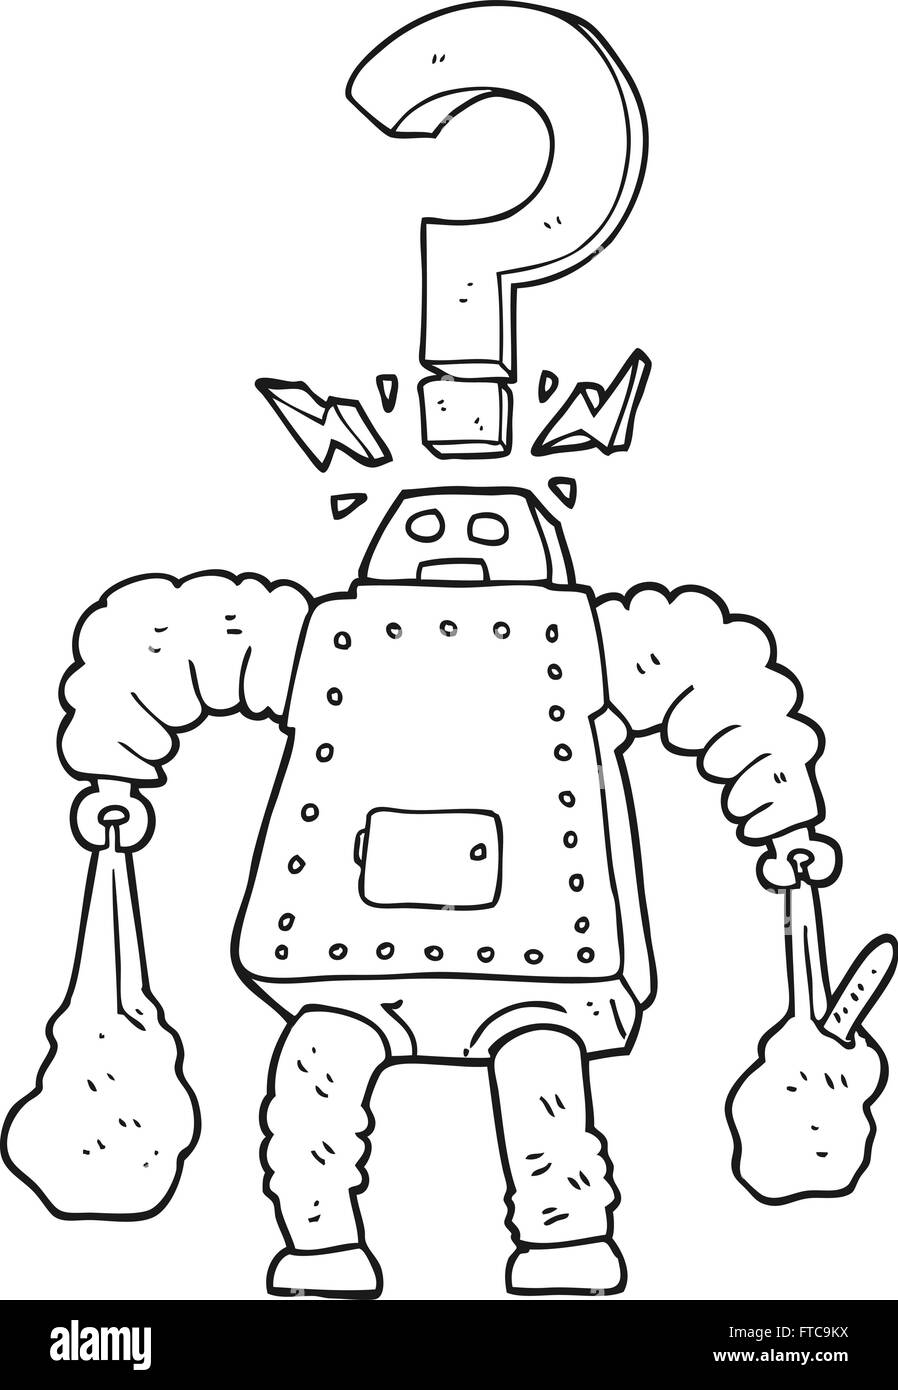 https://c8.alamy.com/comp/FTC9KX/freehand-drawn-black-and-white-cartoon-confused-robot-carrying-shopping-FTC9KX.jpg